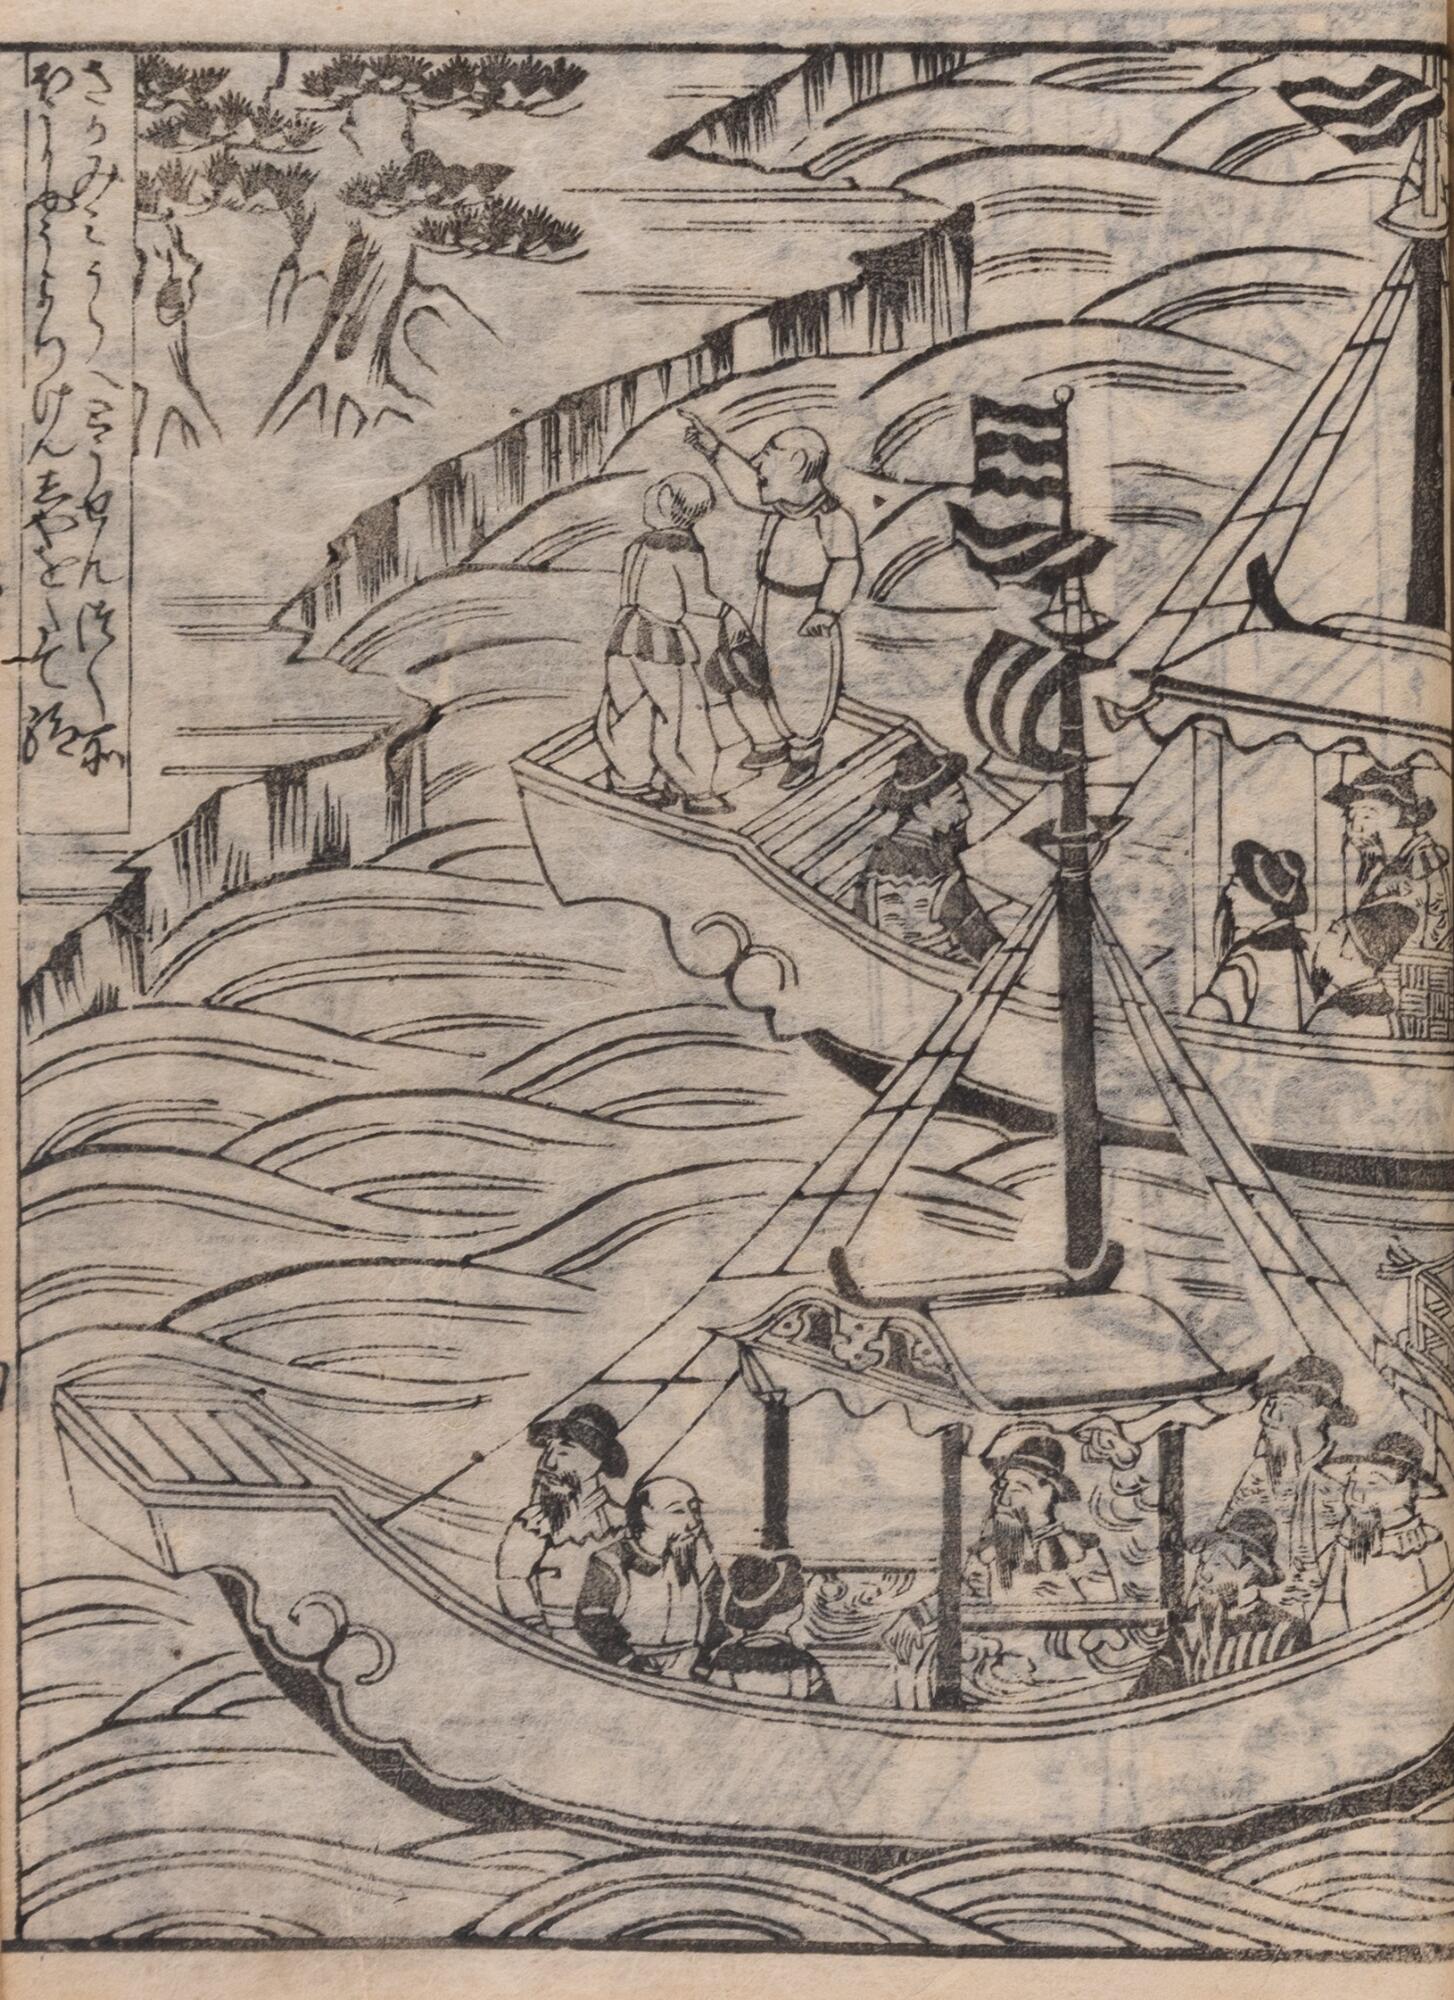 Chinese trade ships off Miura bay in Sagami province in 1578; this is how most early modern Japanese would have visualized news of approaching foreign ships. From Miura Jōshin, Hōjō godaiki (北条五代記, &ldquo;Record of the Five Reigns of the Hōjō&rdquo;), vol. 10 (1659). Cambridge University Library